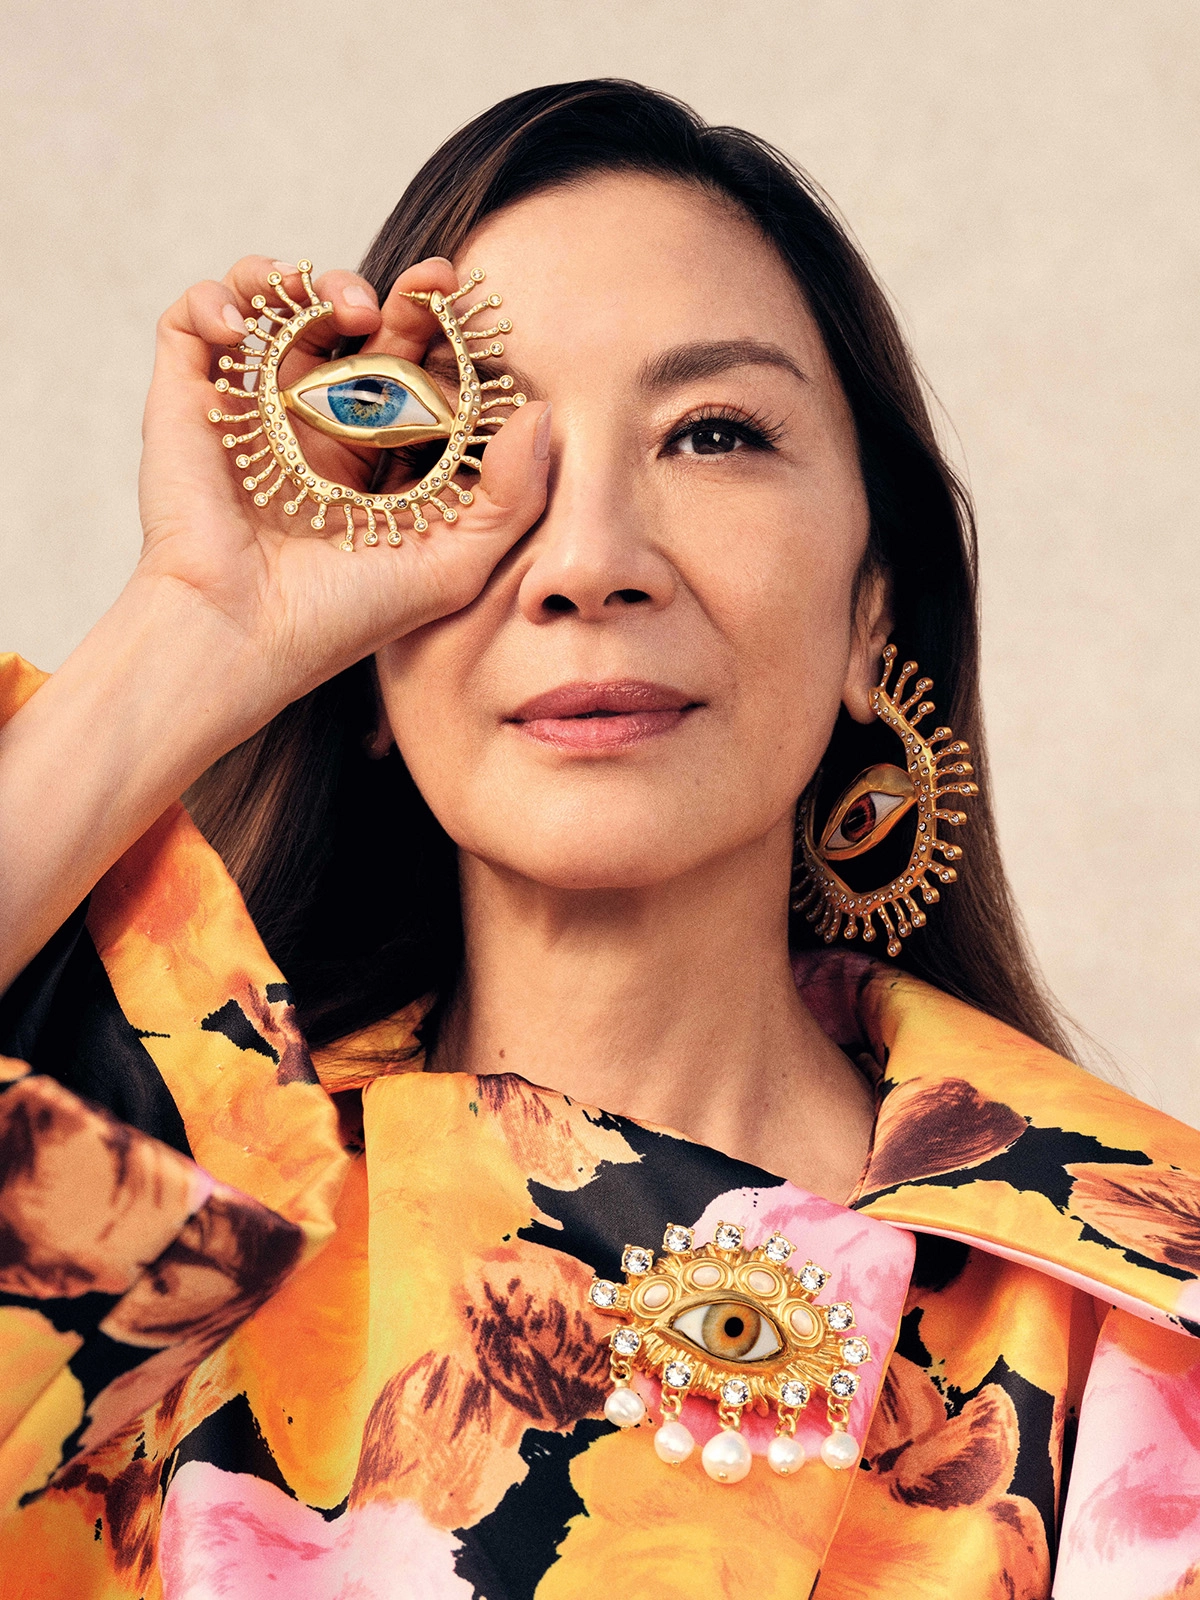 Michelle Yeoh covers Elle US November 2022 by Sharif Hamza